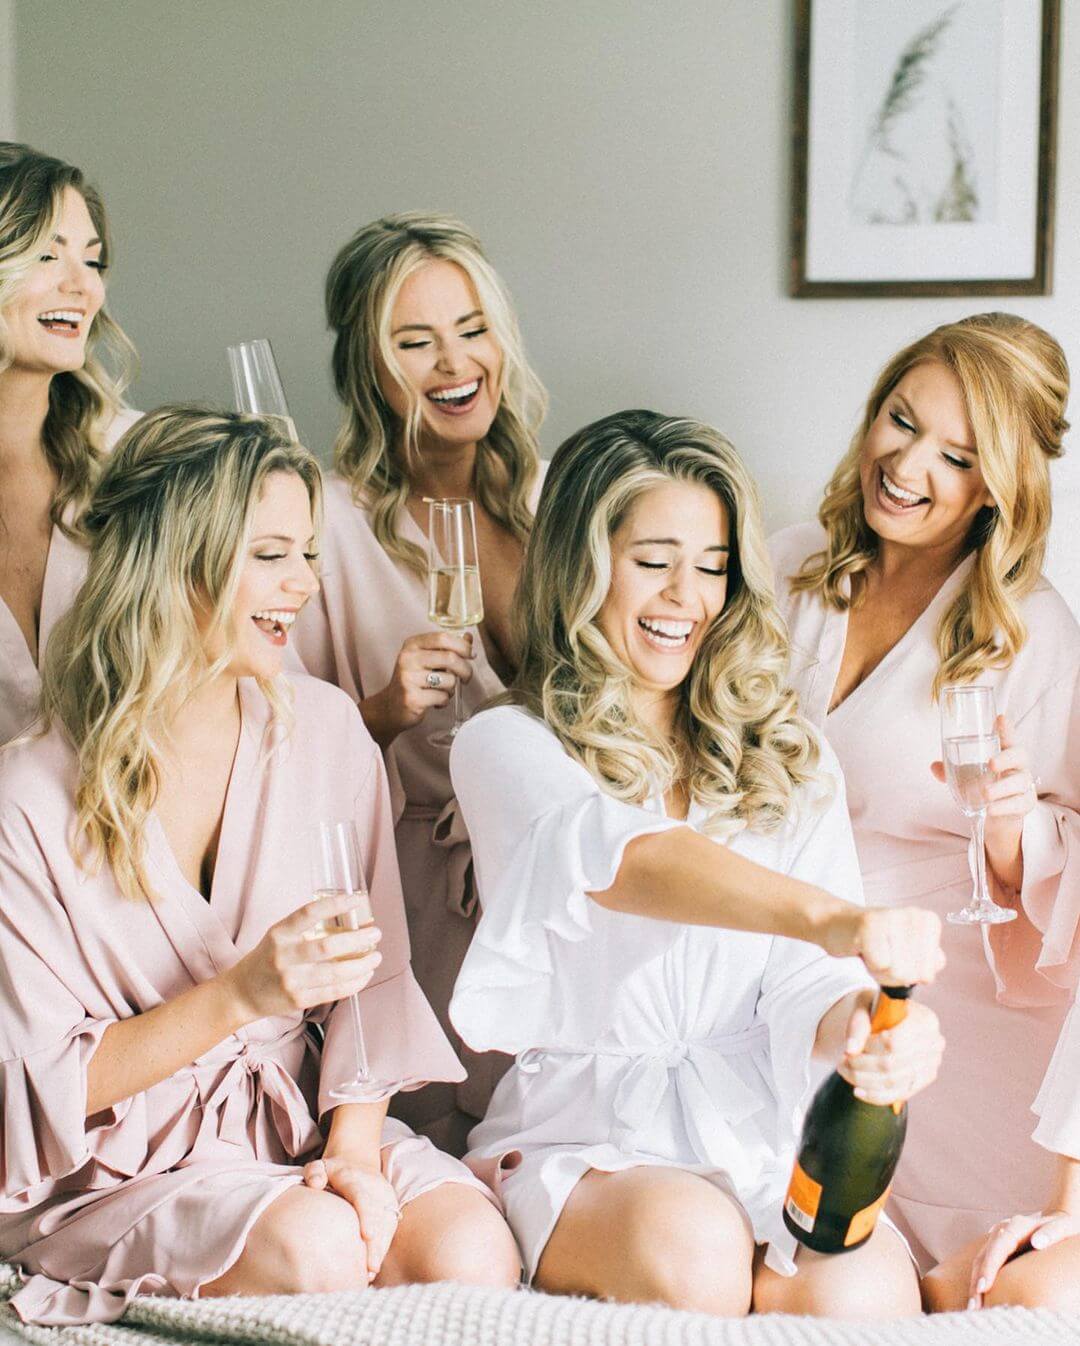 Bride and bridal party popping champagne and smiling with hair and makeup done by Kristy's Artistry Design Team.